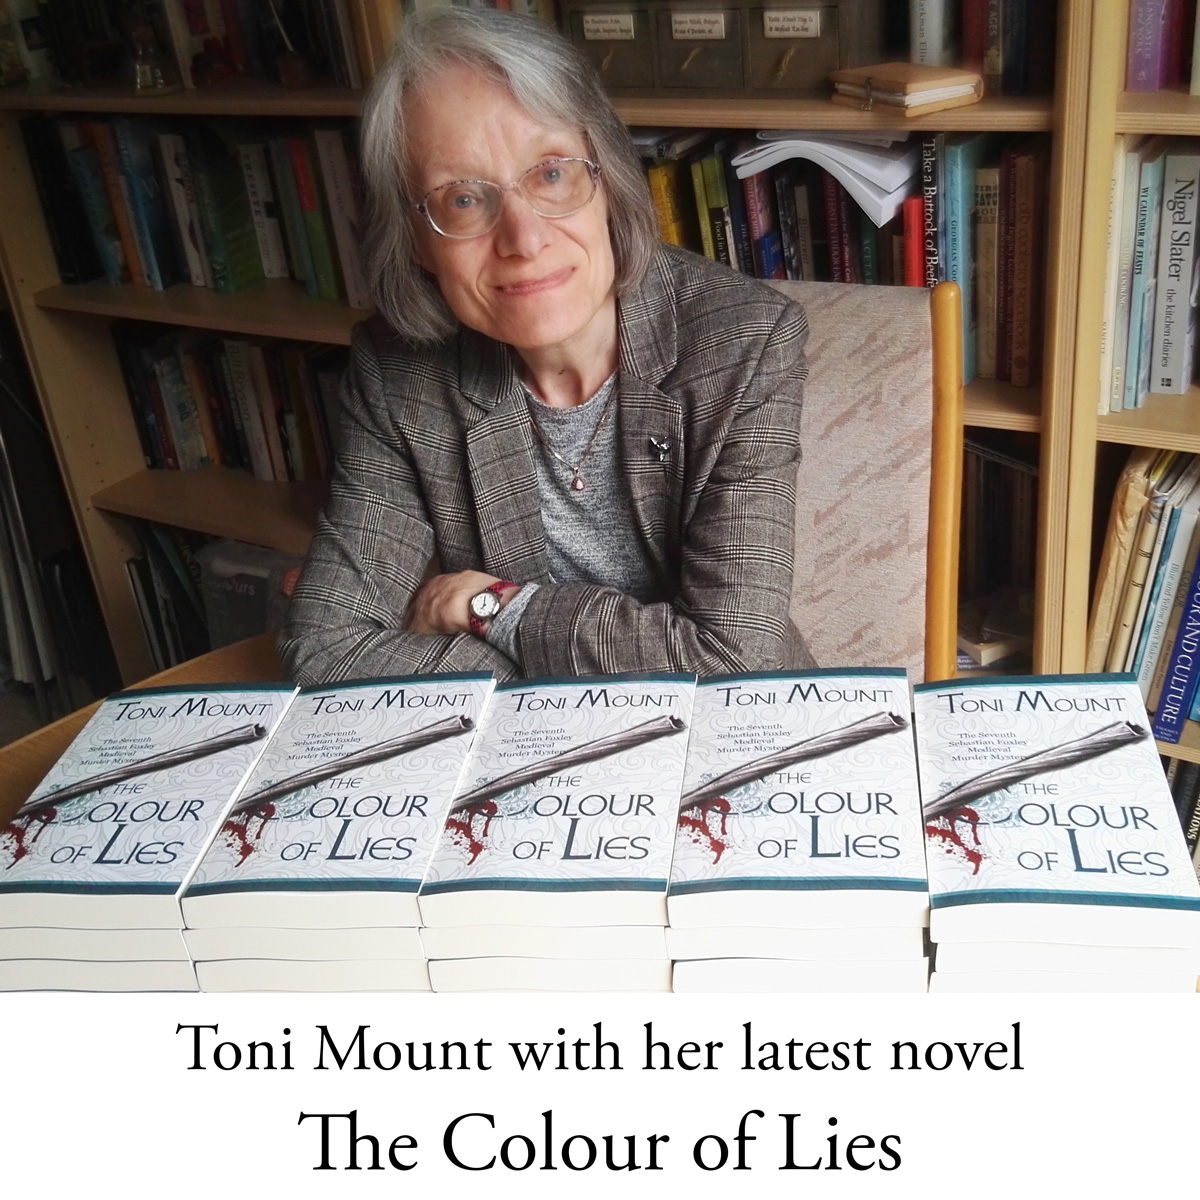 Toni Mount and The Colour of Lies